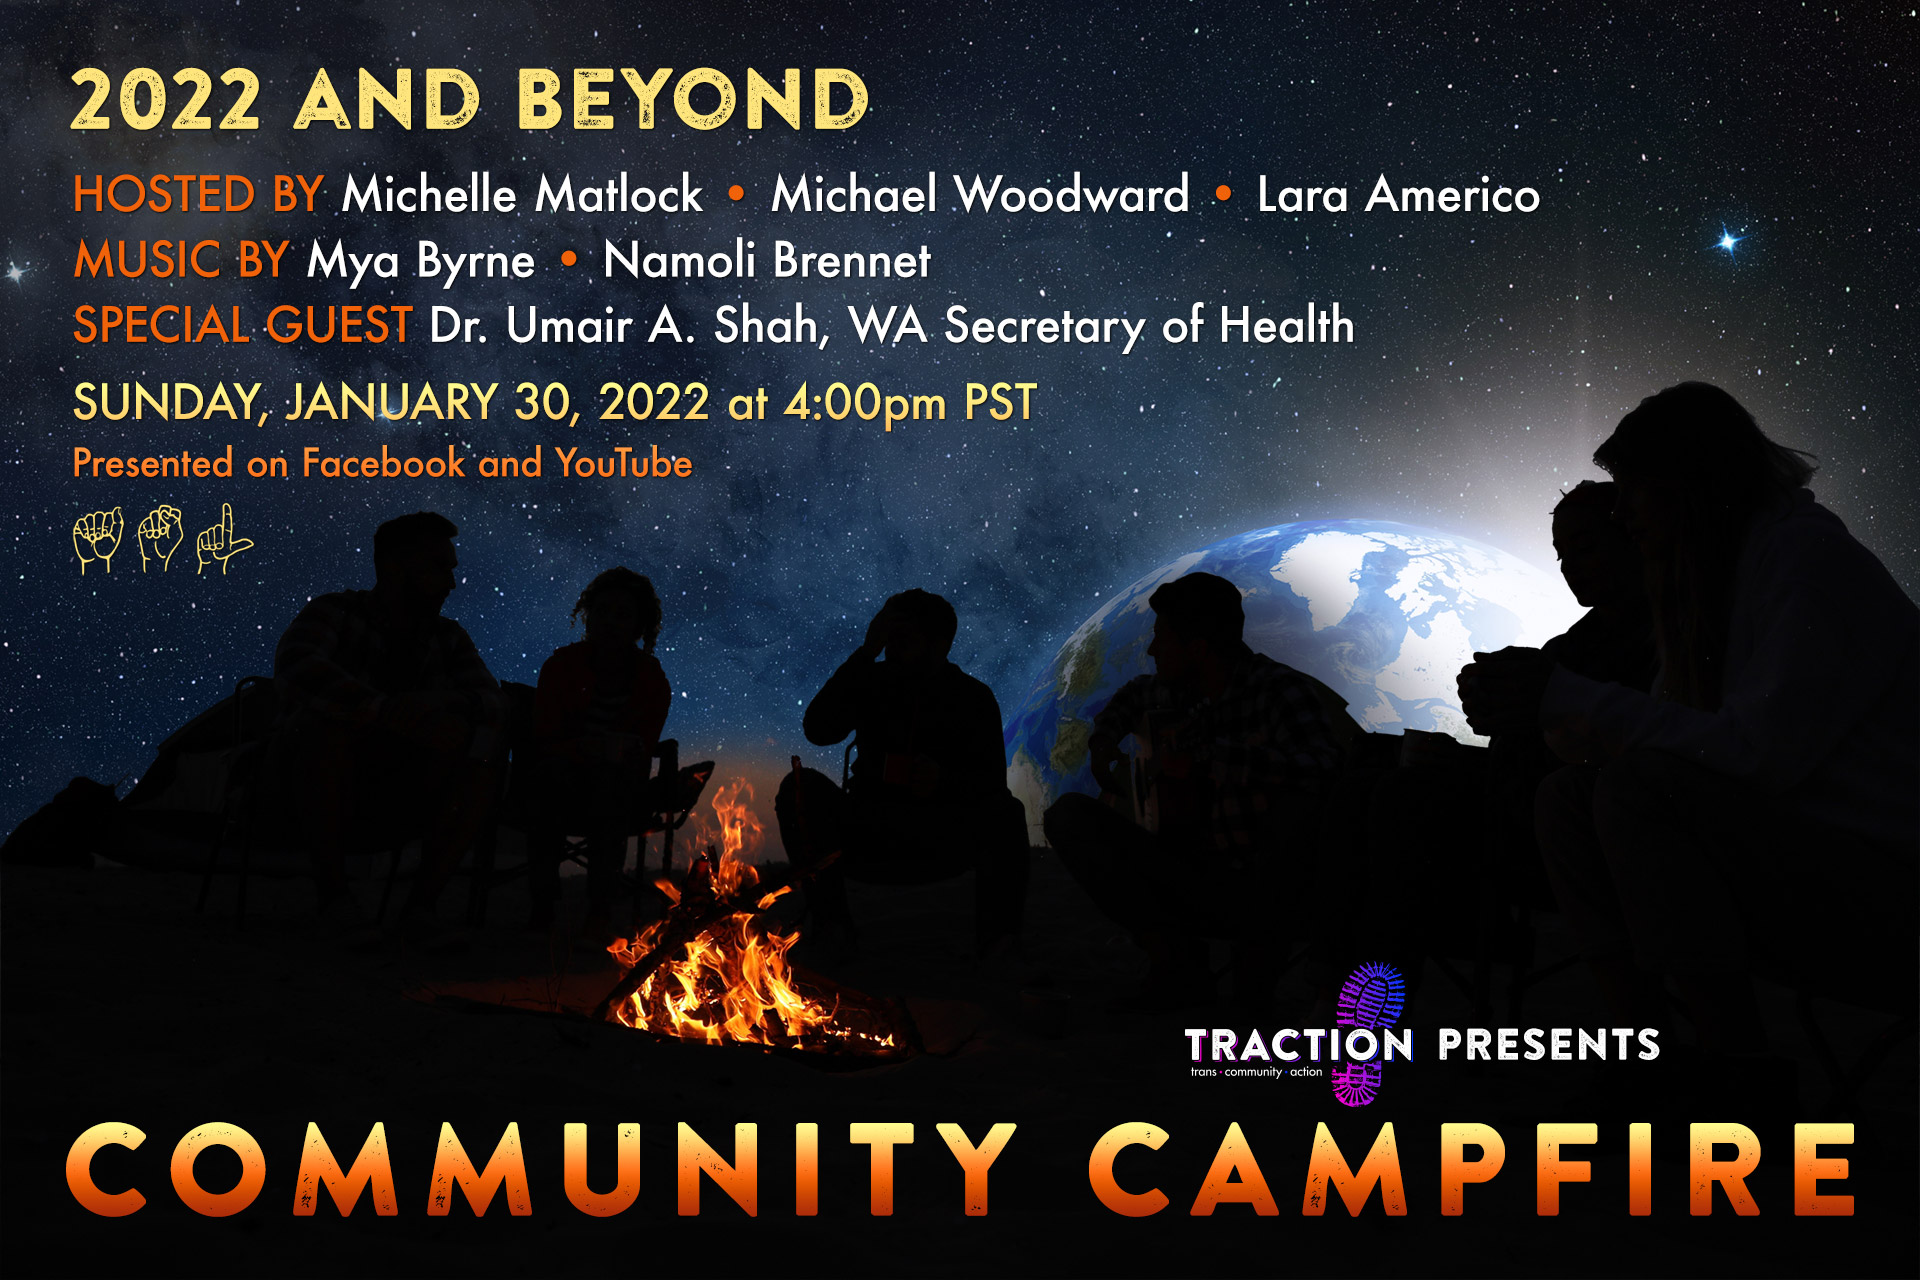 Community Campfire: 2022 and Beyond